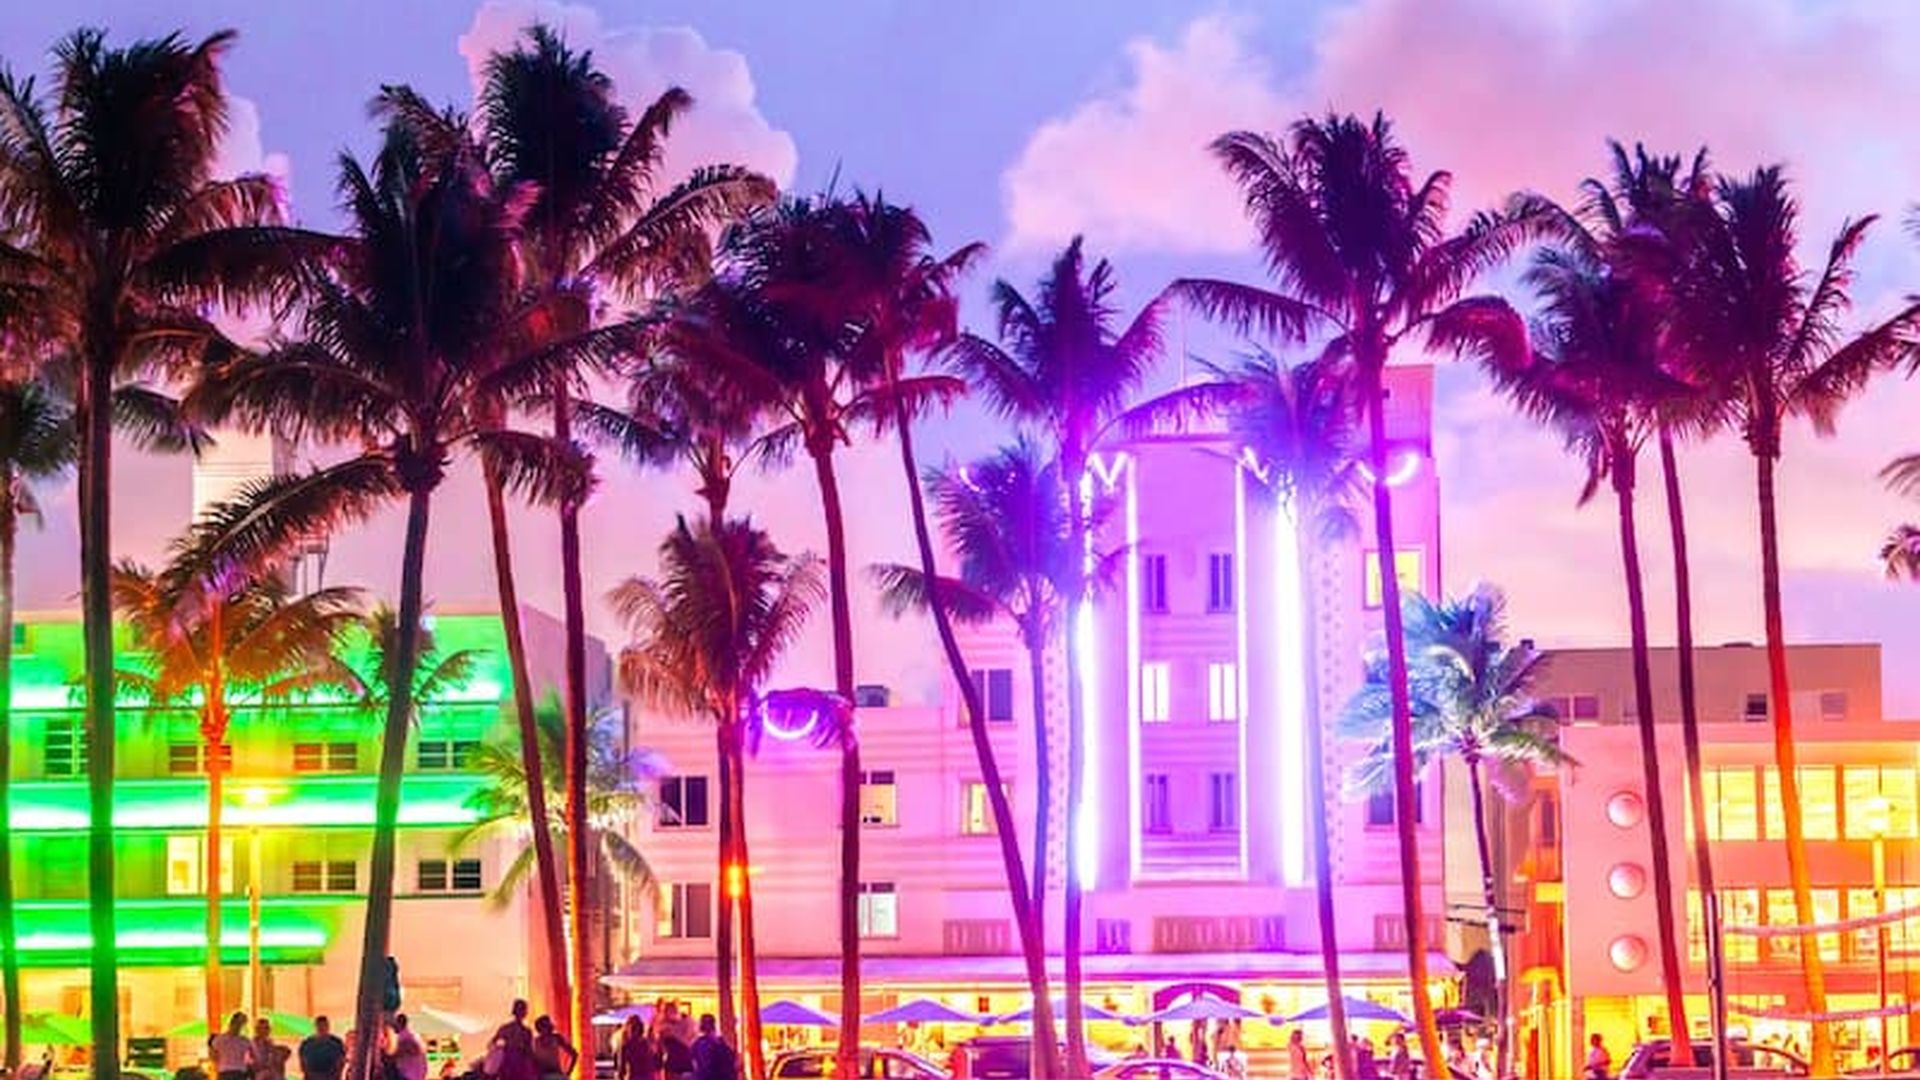 THINGS YOU MUST KNOW ABOUT YOUR TRIP TO MIAMI